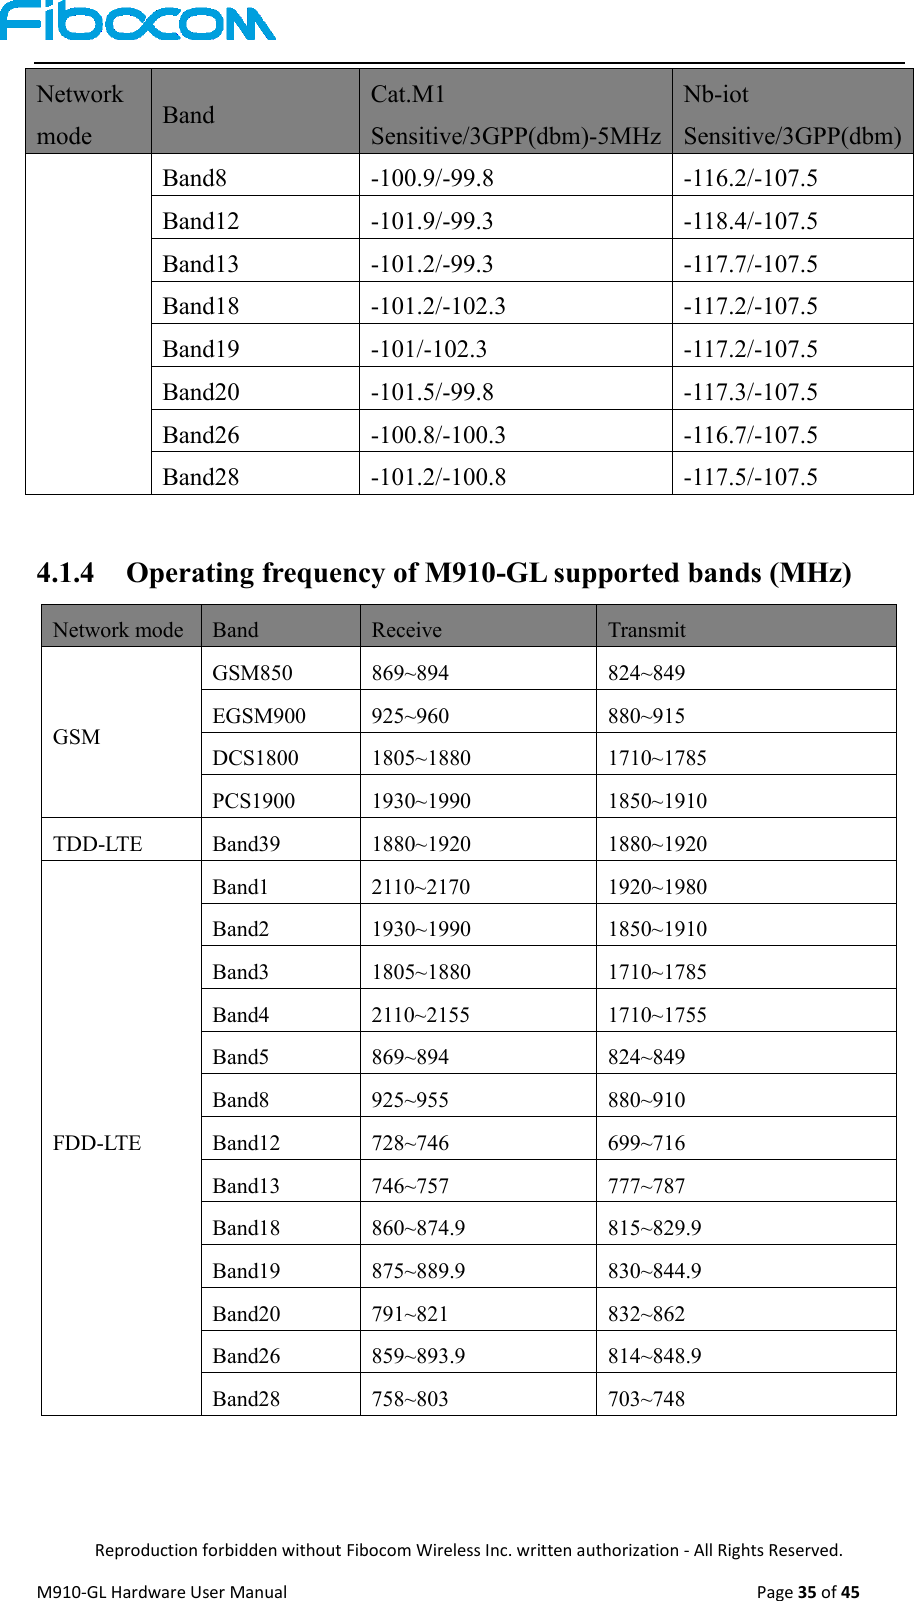  Reproduction forbidden without Fibocom Wireless Inc. written authorization - All Rights Reserved. M910-GL Hardware User Manual                                                                                                  Page 35 of 45  Network mode Band Cat.M1 Sensitive/3GPP(dbm)-5MHz Nb-iot Sensitive/3GPP(dbm) Band8 -100.9/-99.8 -116.2/-107.5 Band12 -101.9/-99.3 -118.4/-107.5 Band13 -101.2/-99.3 -117.7/-107.5 Band18 -101.2/-102.3 -117.2/-107.5 Band19 -101/-102.3 -117.2/-107.5 Band20 -101.5/-99.8 -117.3/-107.5 Band26 -100.8/-100.3 -116.7/-107.5 Band28 -101.2/-100.8 -117.5/-107.5  4.1.4   Operating frequency of M910-GL supported bands (MHz) Network mode Band Receive Transmit GSM GSM850 869~894 824~849 EGSM900 925~960 880~915 DCS1800 1805~1880 1710~1785 PCS1900 1930~1990 1850~1910 TDD-LTE Band39 1880~1920 1880~1920 FDD-LTE Band1 2110~2170 1920~1980 Band2 1930~1990 1850~1910 Band3 1805~1880 1710~1785 Band4 2110~2155 1710~1755 Band5 869~894 824~849 Band8 925~955 880~910 Band12 728~746 699~716 Band13 746~757 777~787 Band18 860~874.9 815~829.9 Band19 875~889.9 830~844.9 Band20 791~821 832~862 Band26 859~893.9 814~848.9 Band28 758~803 703~748  